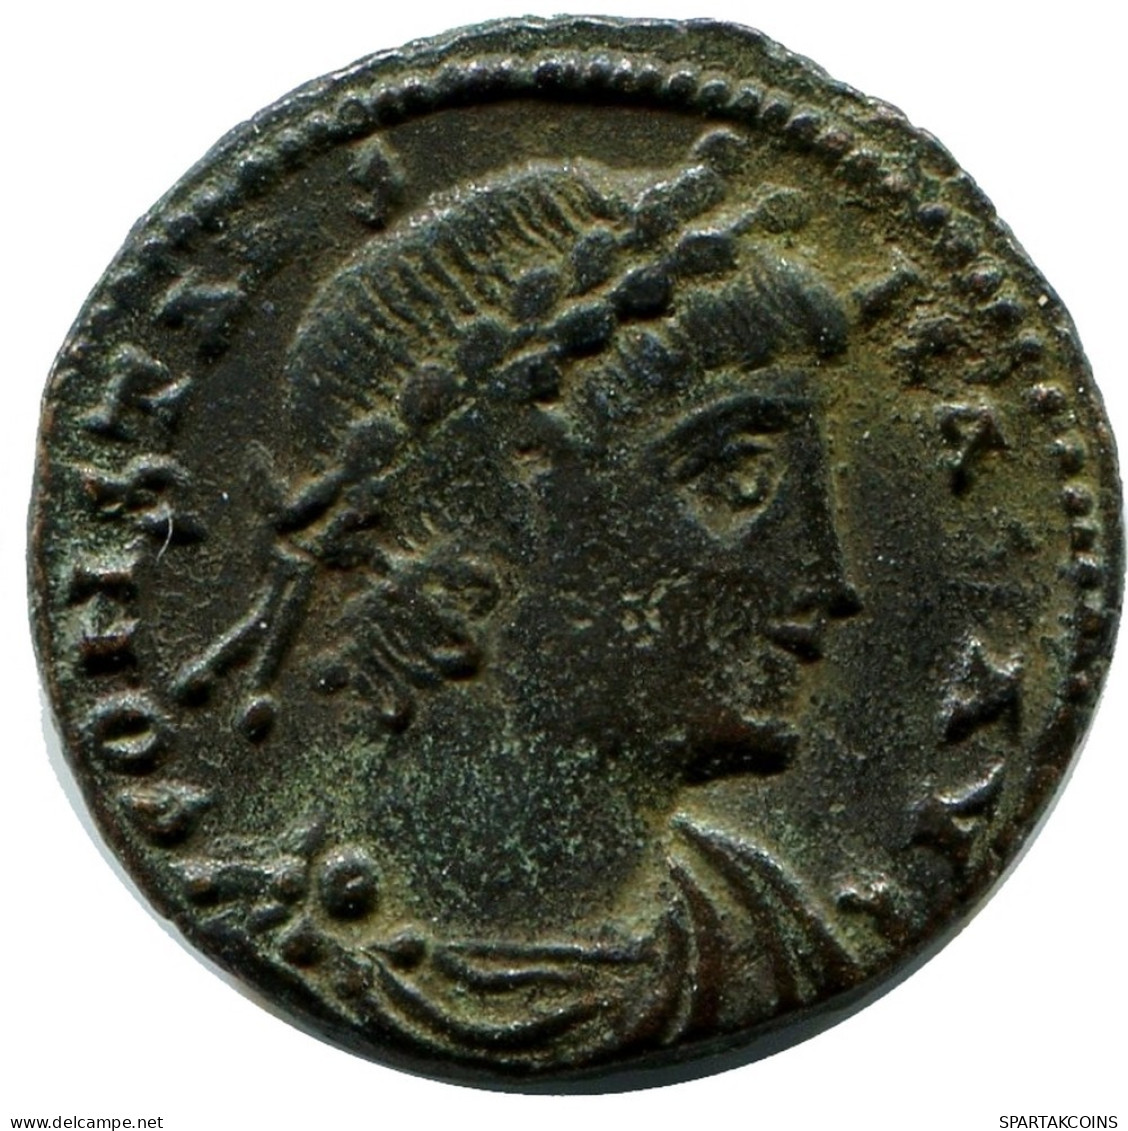 CONSTANS MINTED IN ALEKSANDRIA FROM THE ROYAL ONTARIO MUSEUM #ANC11432.14.F.A - L'Empire Chrétien (307 à 363)